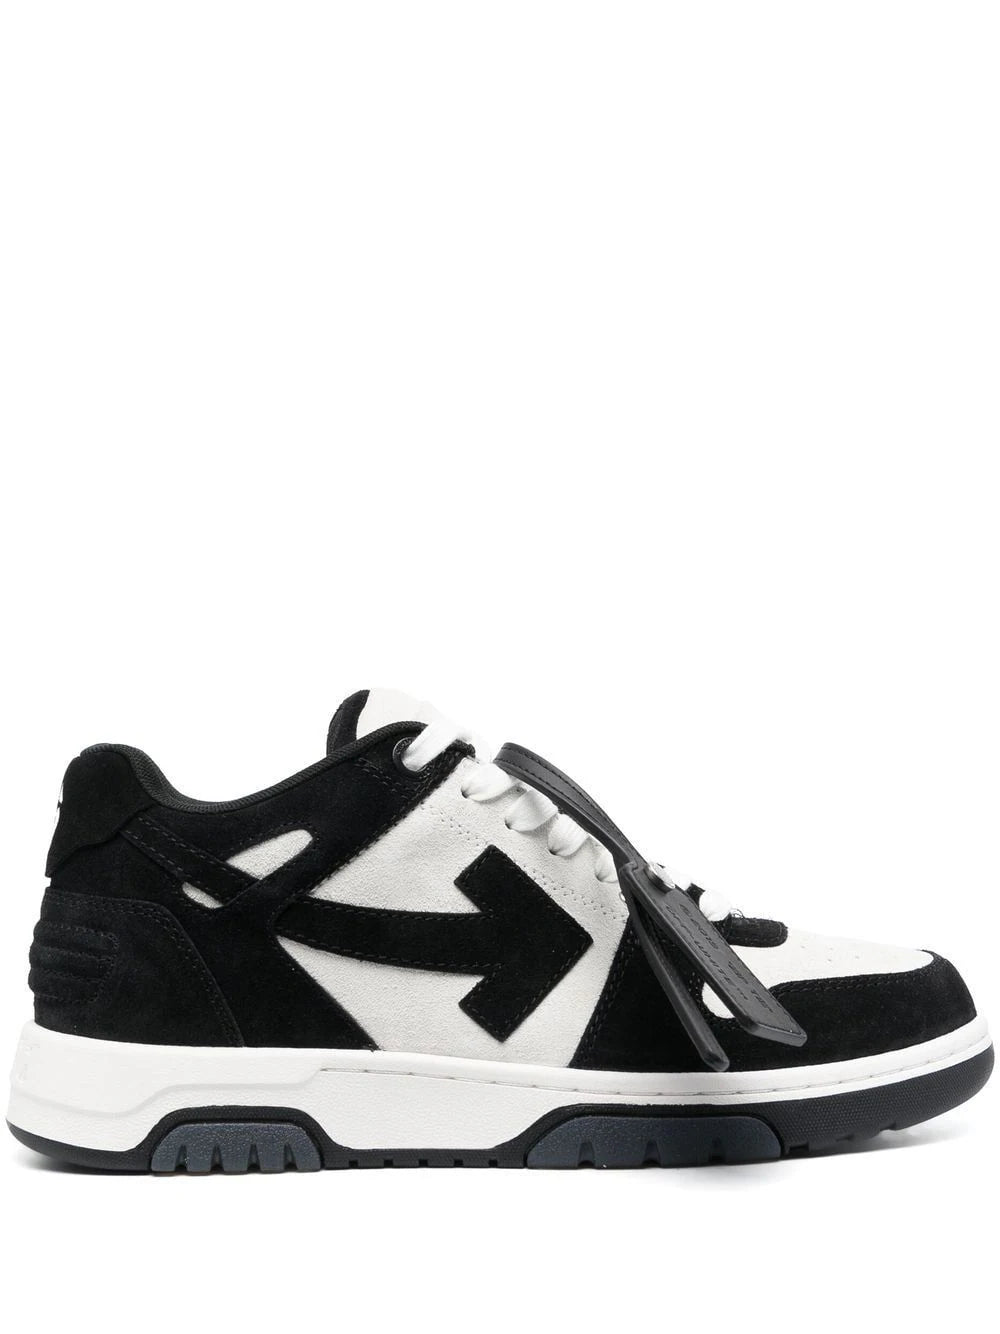 Off-White Out of Office Suede Trainers in Black